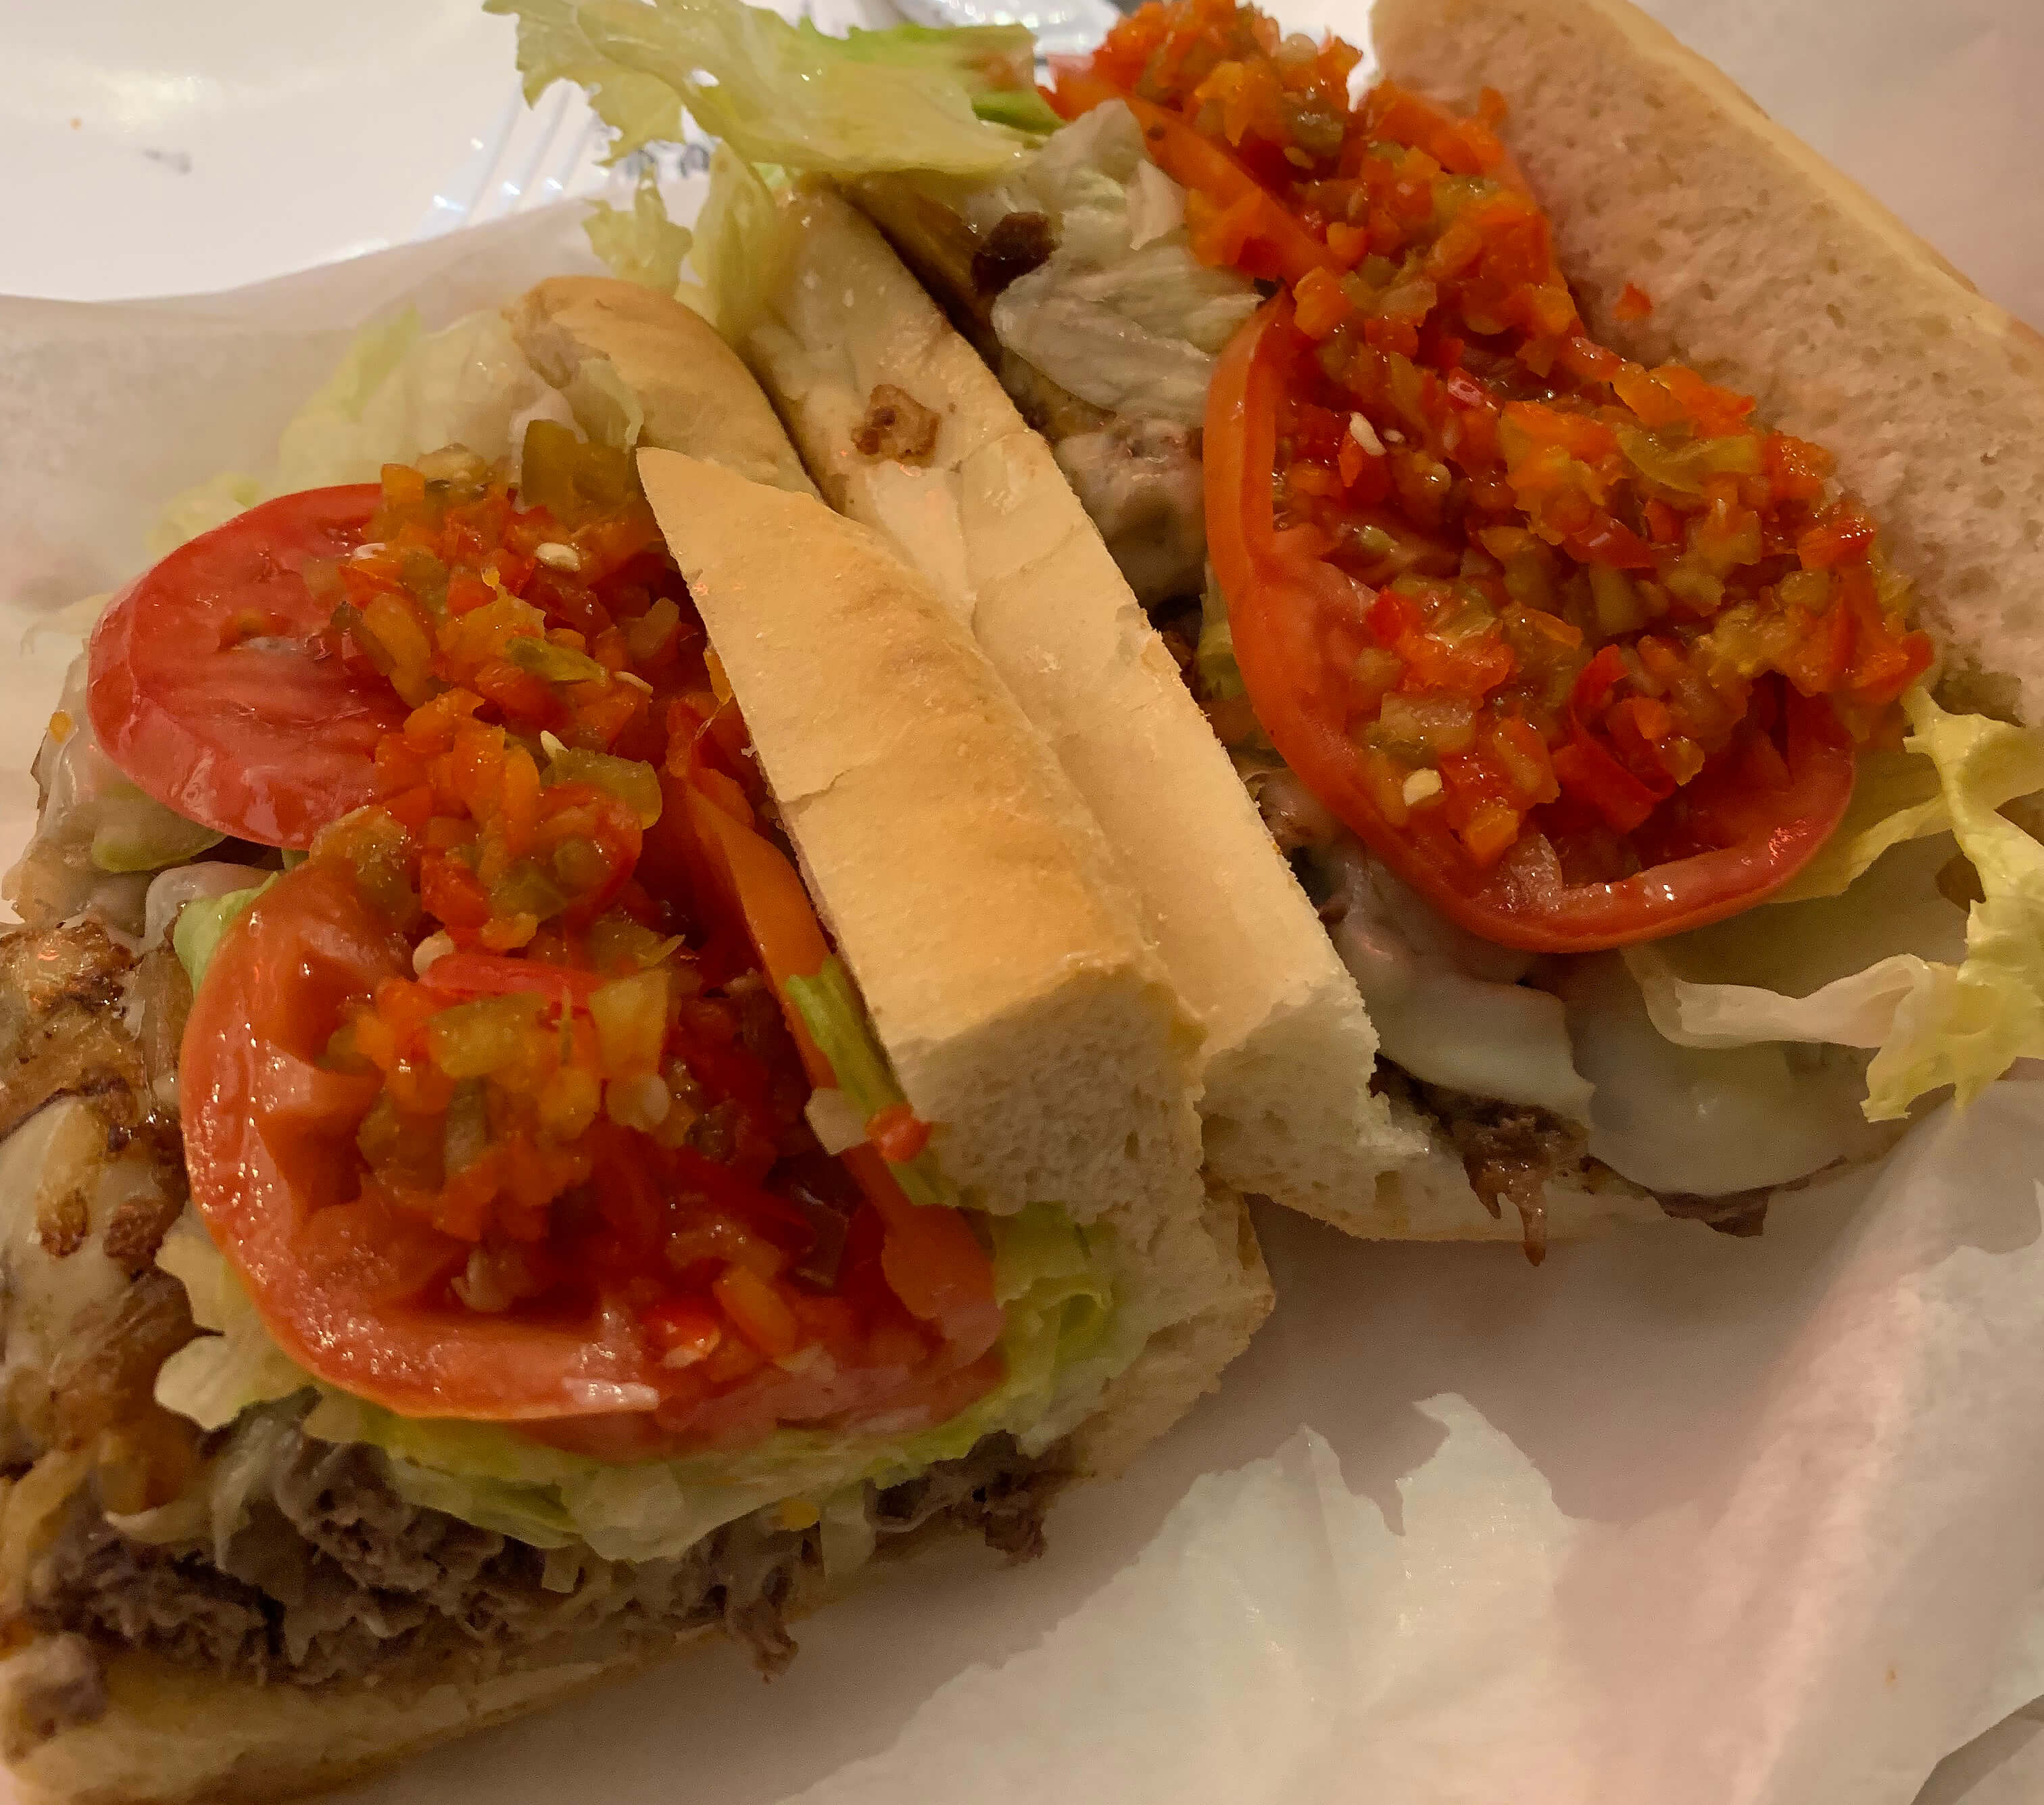 A cheesesteak sub from Atlantic City's famed White House Sub Shop